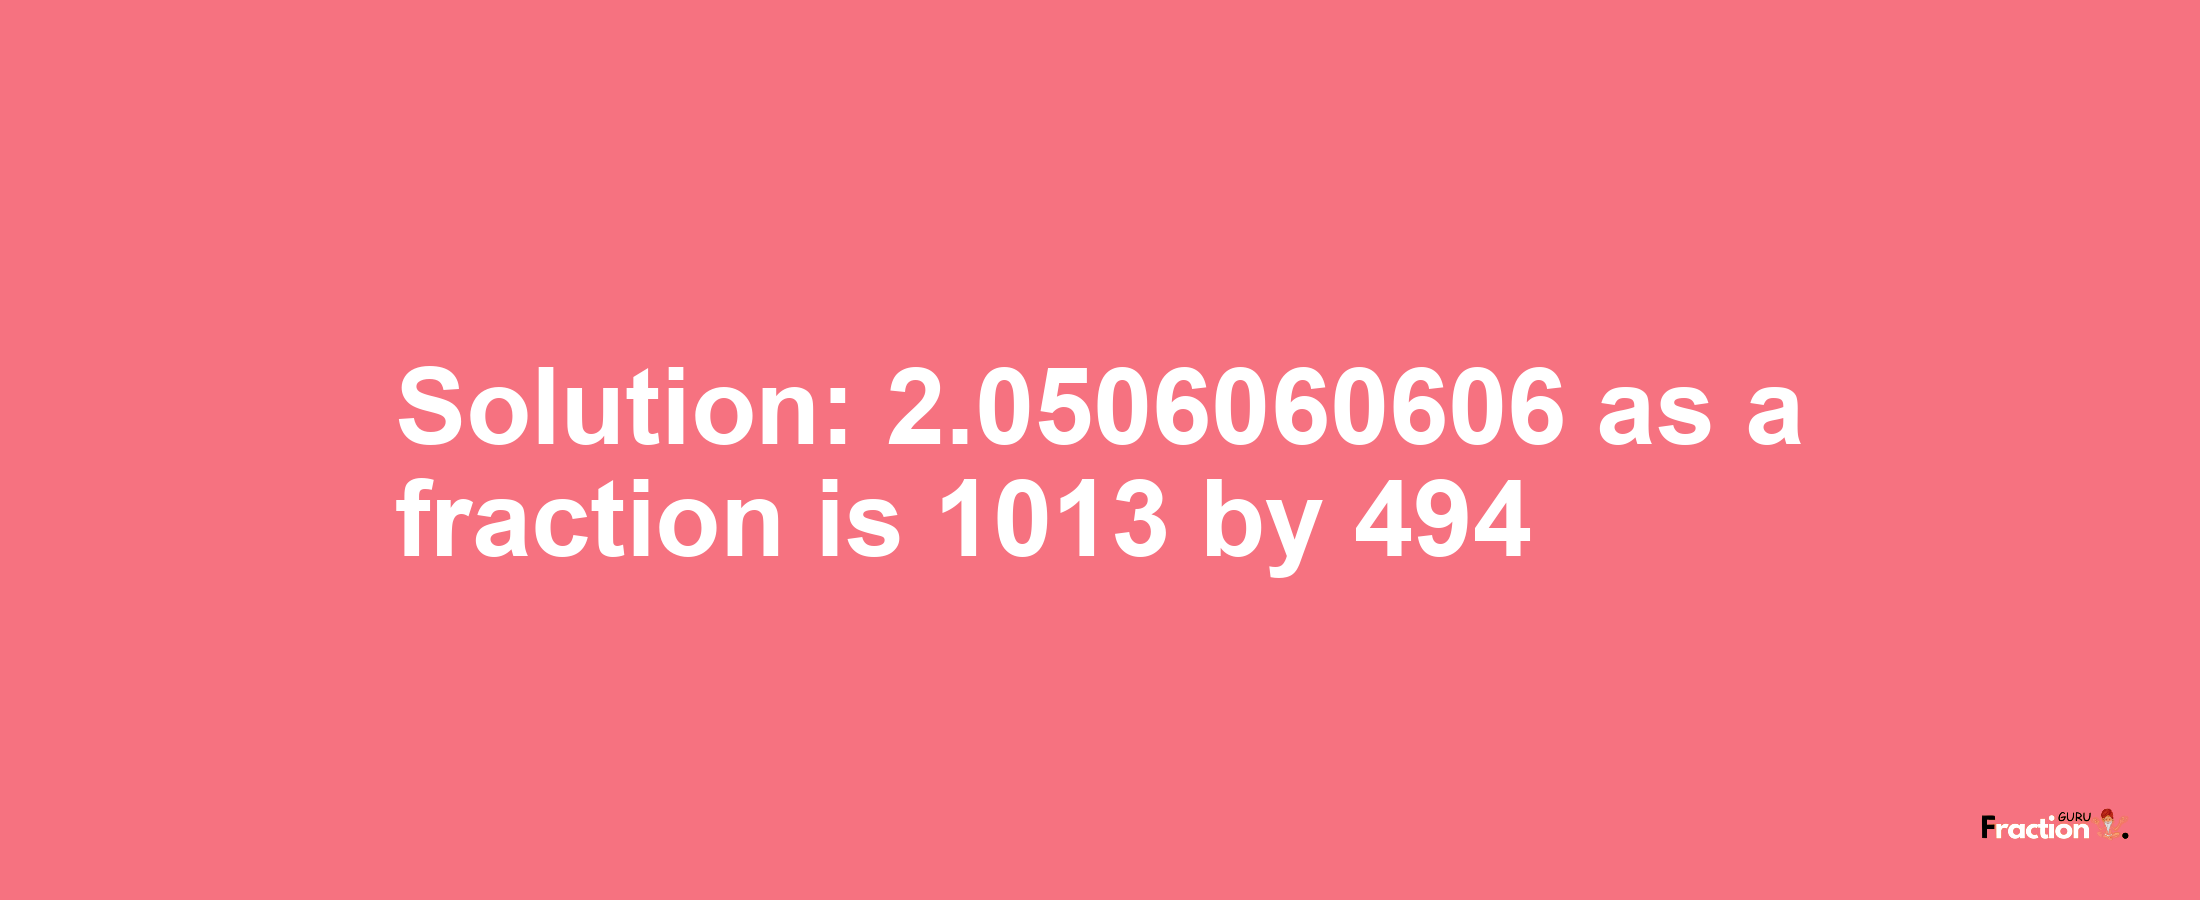 Solution:2.0506060606 as a fraction is 1013/494